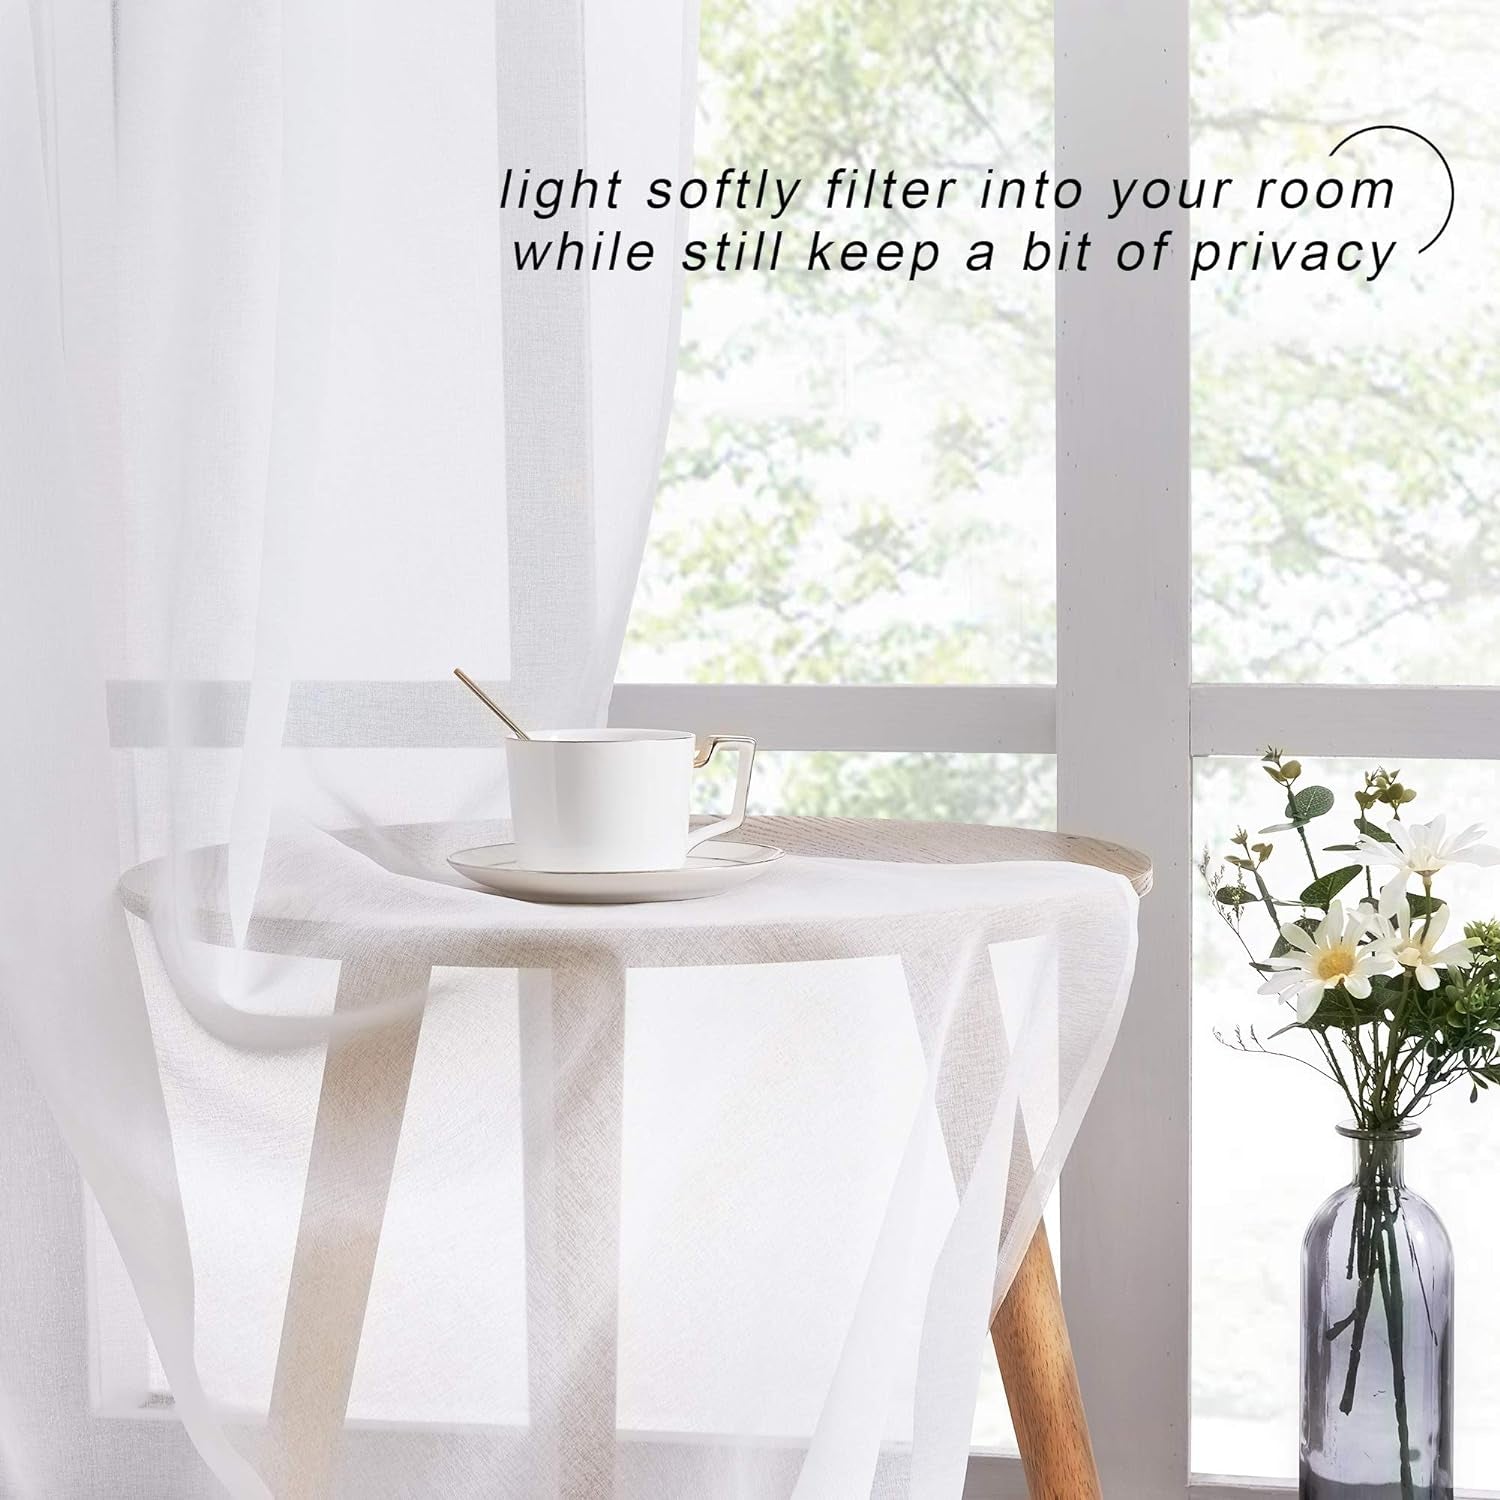 NICETOWN White Semi Sheer Curtains for Living Room- Linen Texture Light Airy Drapes, Rod Pocket & Back Tab Design Voile Panels for Large Window, Set of 2, 55 X 108 Inch  NICETOWN   